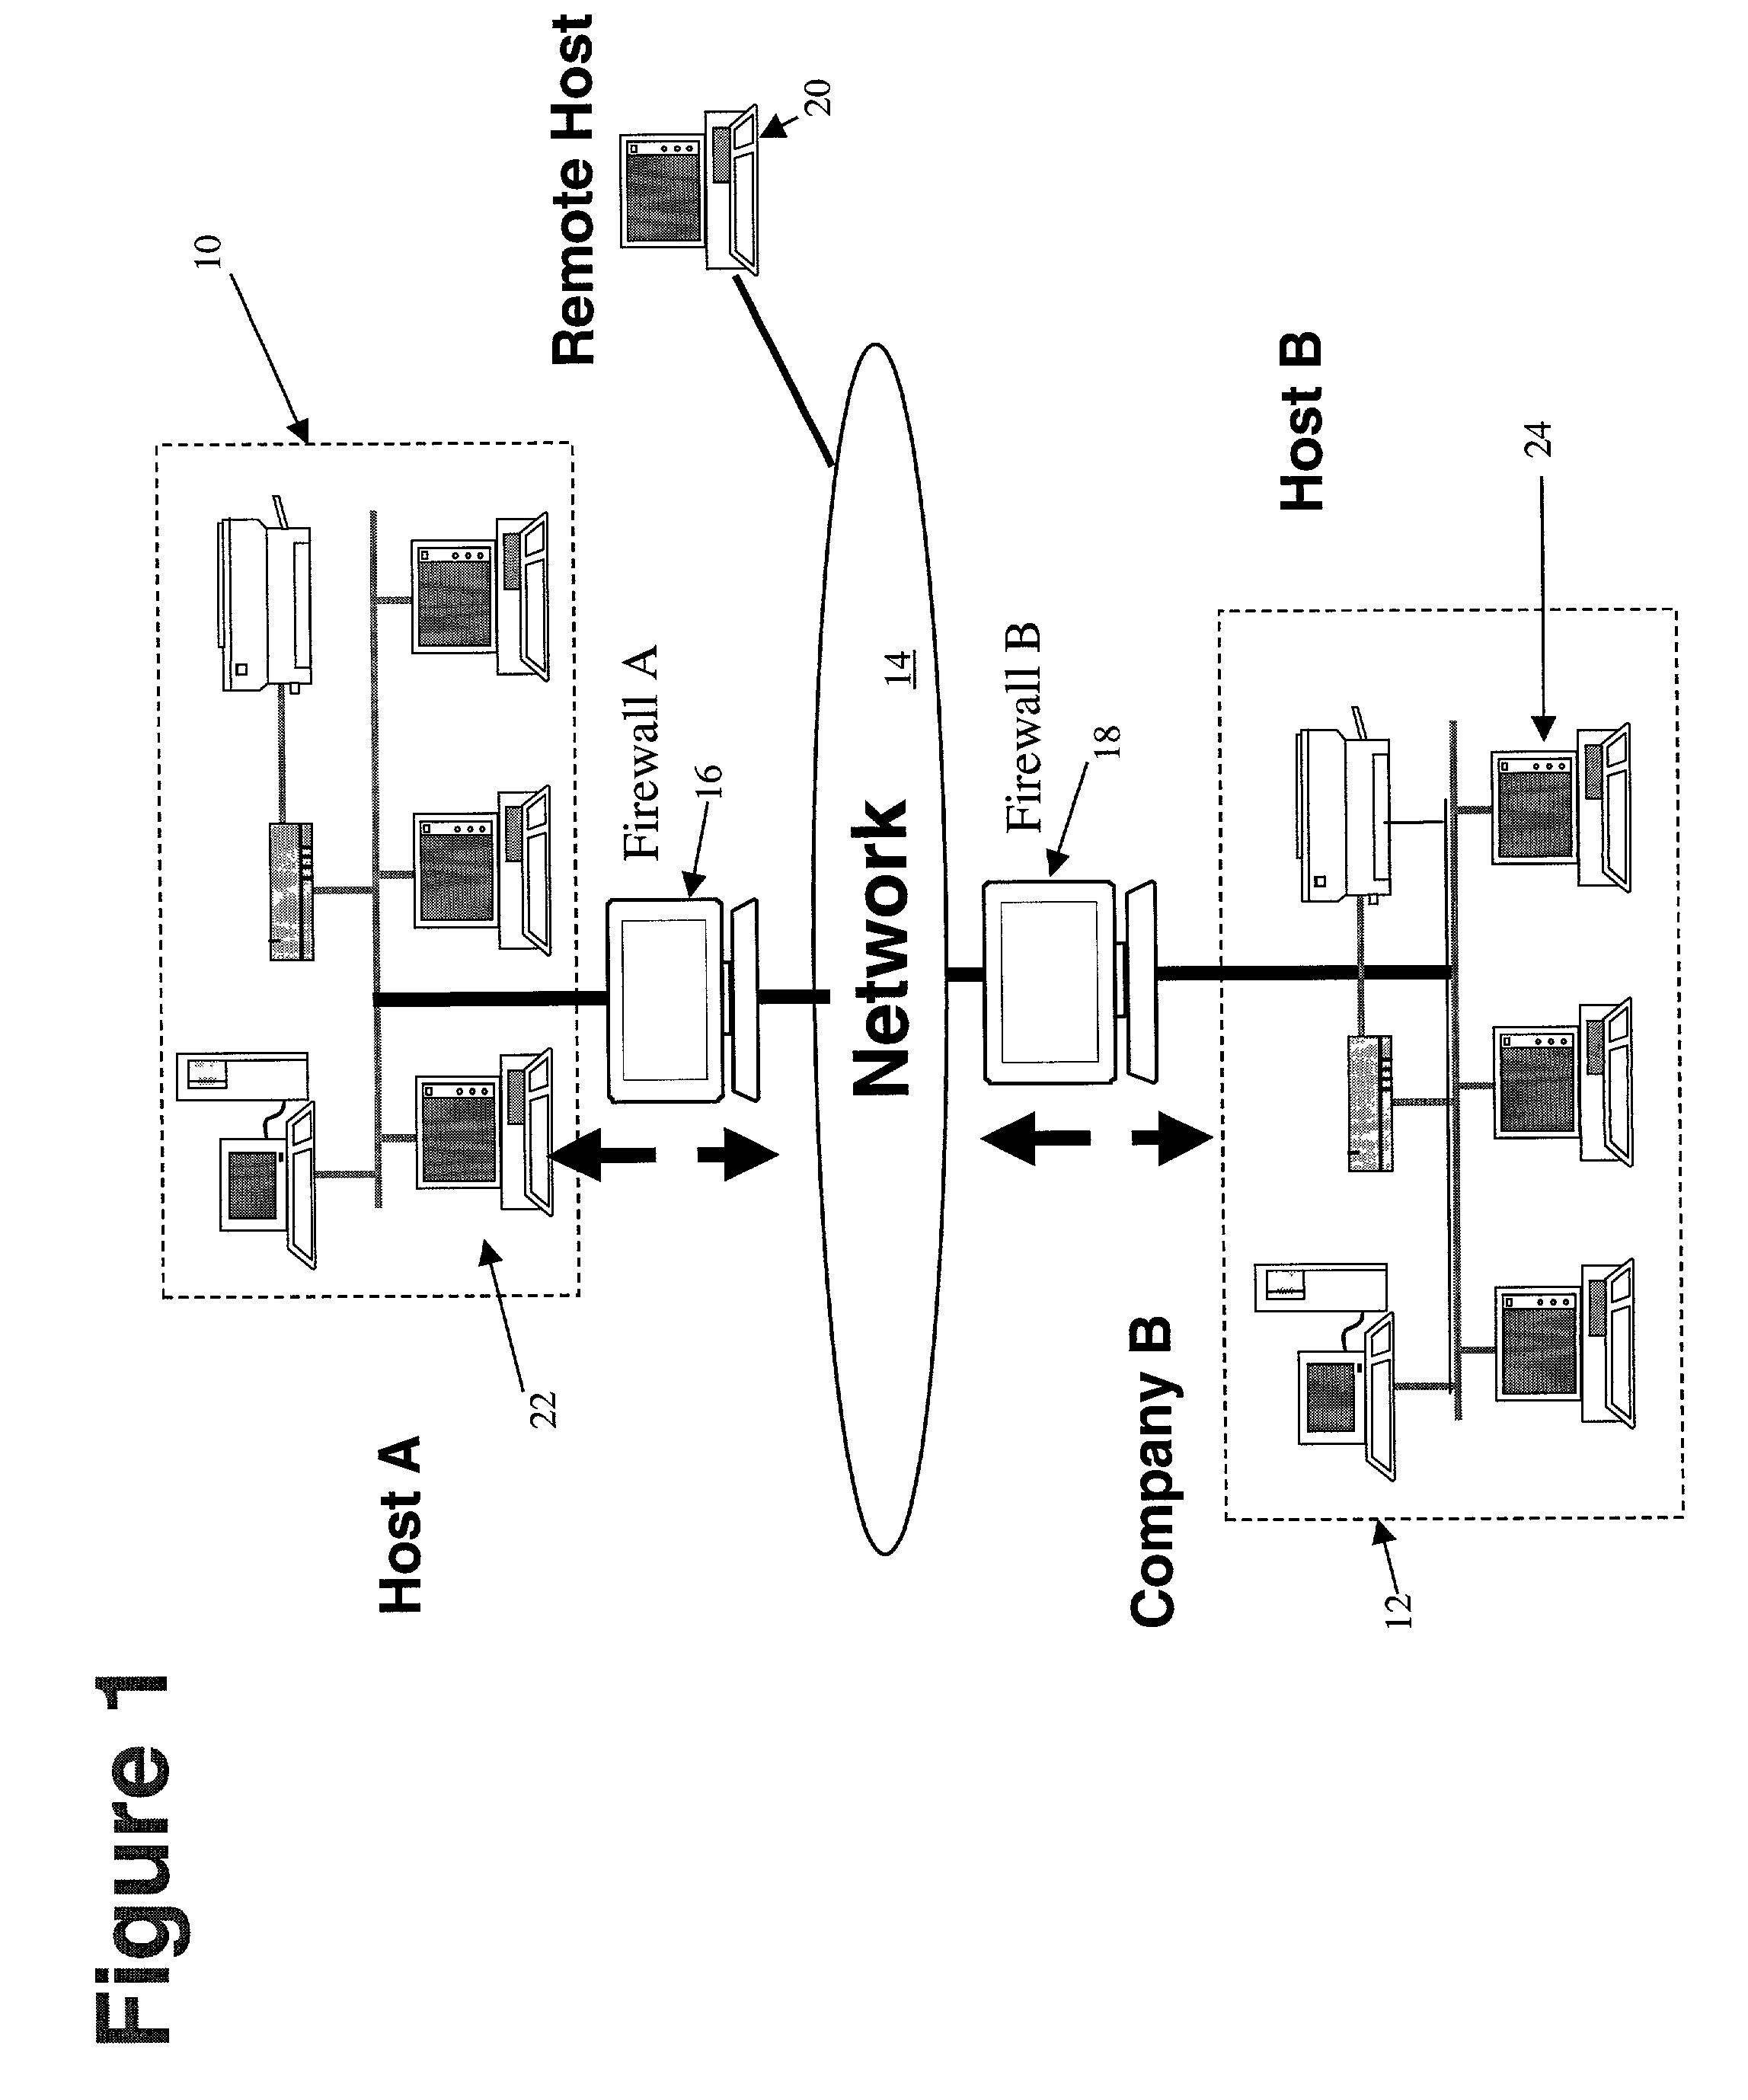 Method and apparatus for securely transmitting encrypted data through a firewall and for monitoring user traffic